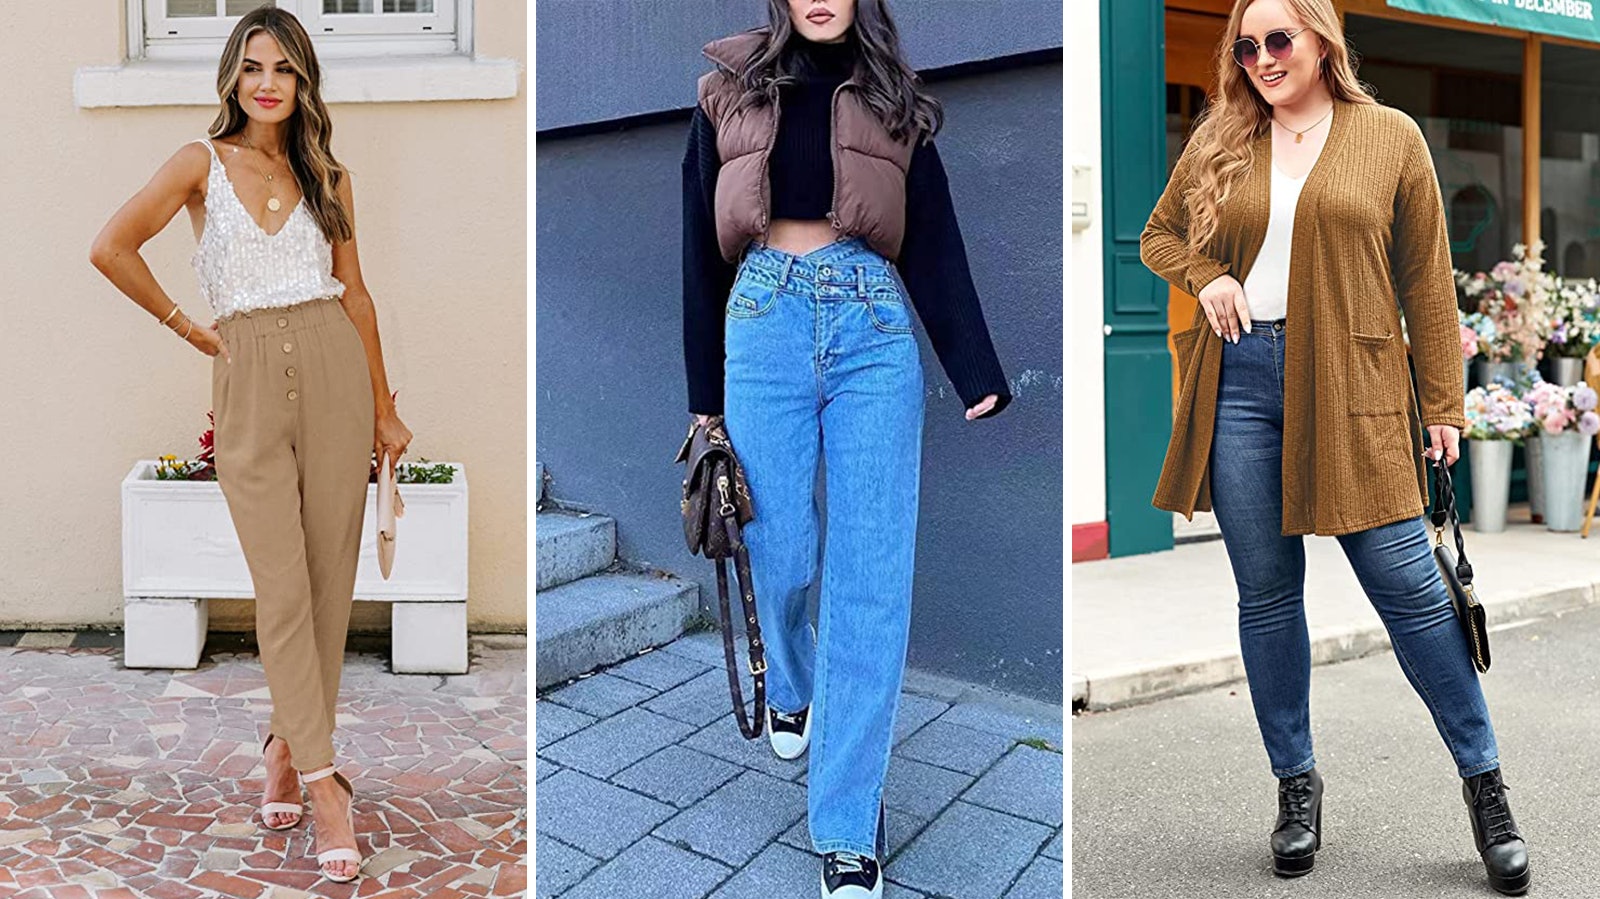 Dress It Down by Tying Your Jacket Around Your Waist, This Is Exactly How  Street Style Stars Make Oversize Shirts Look So Good